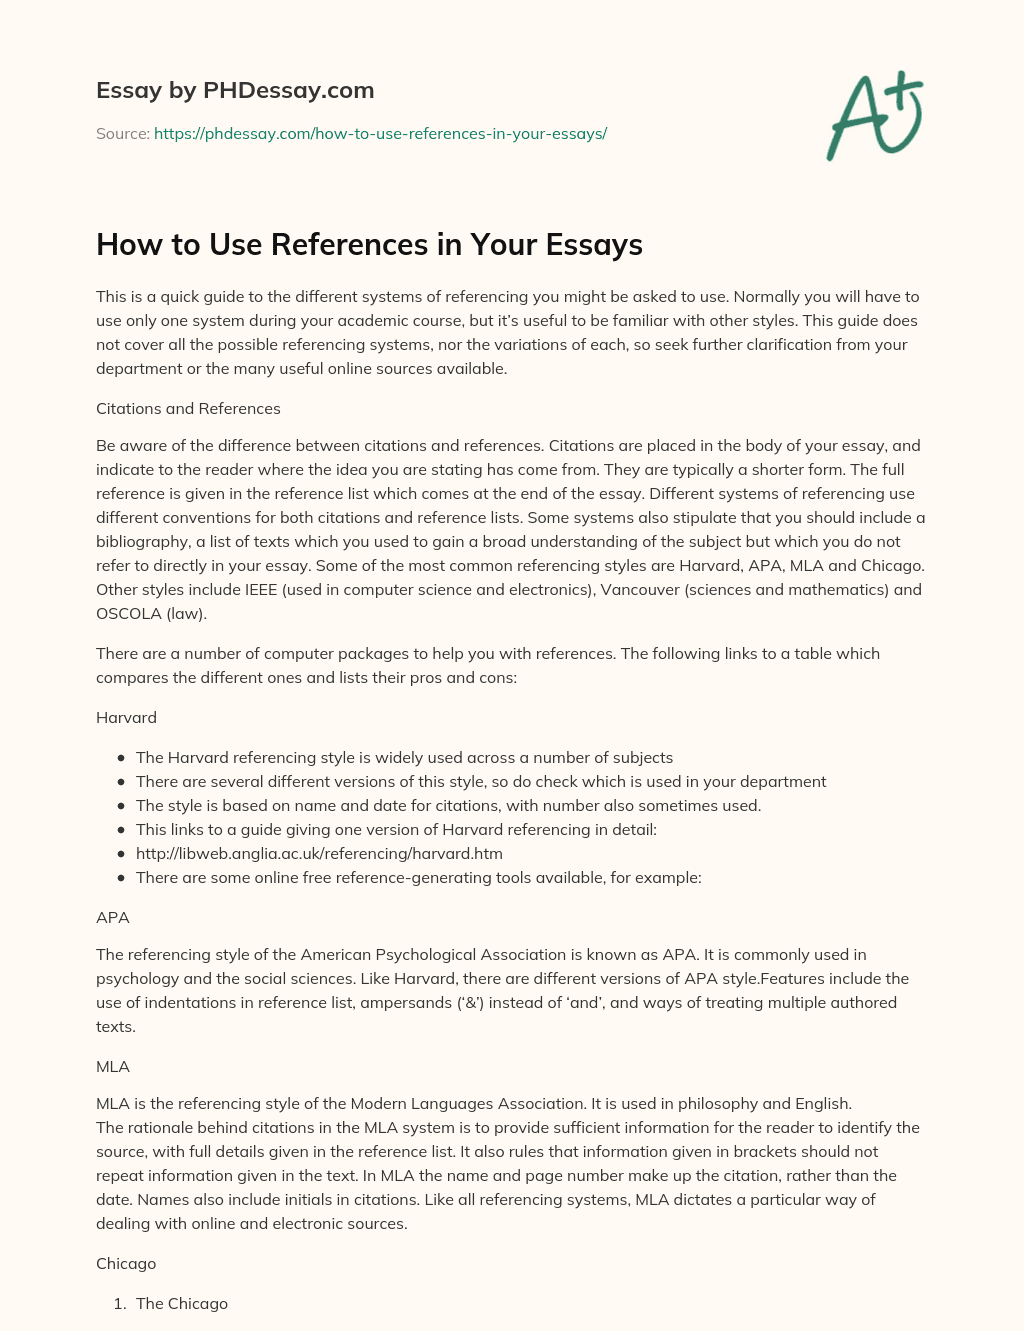 How to Use References in Your Essays essay